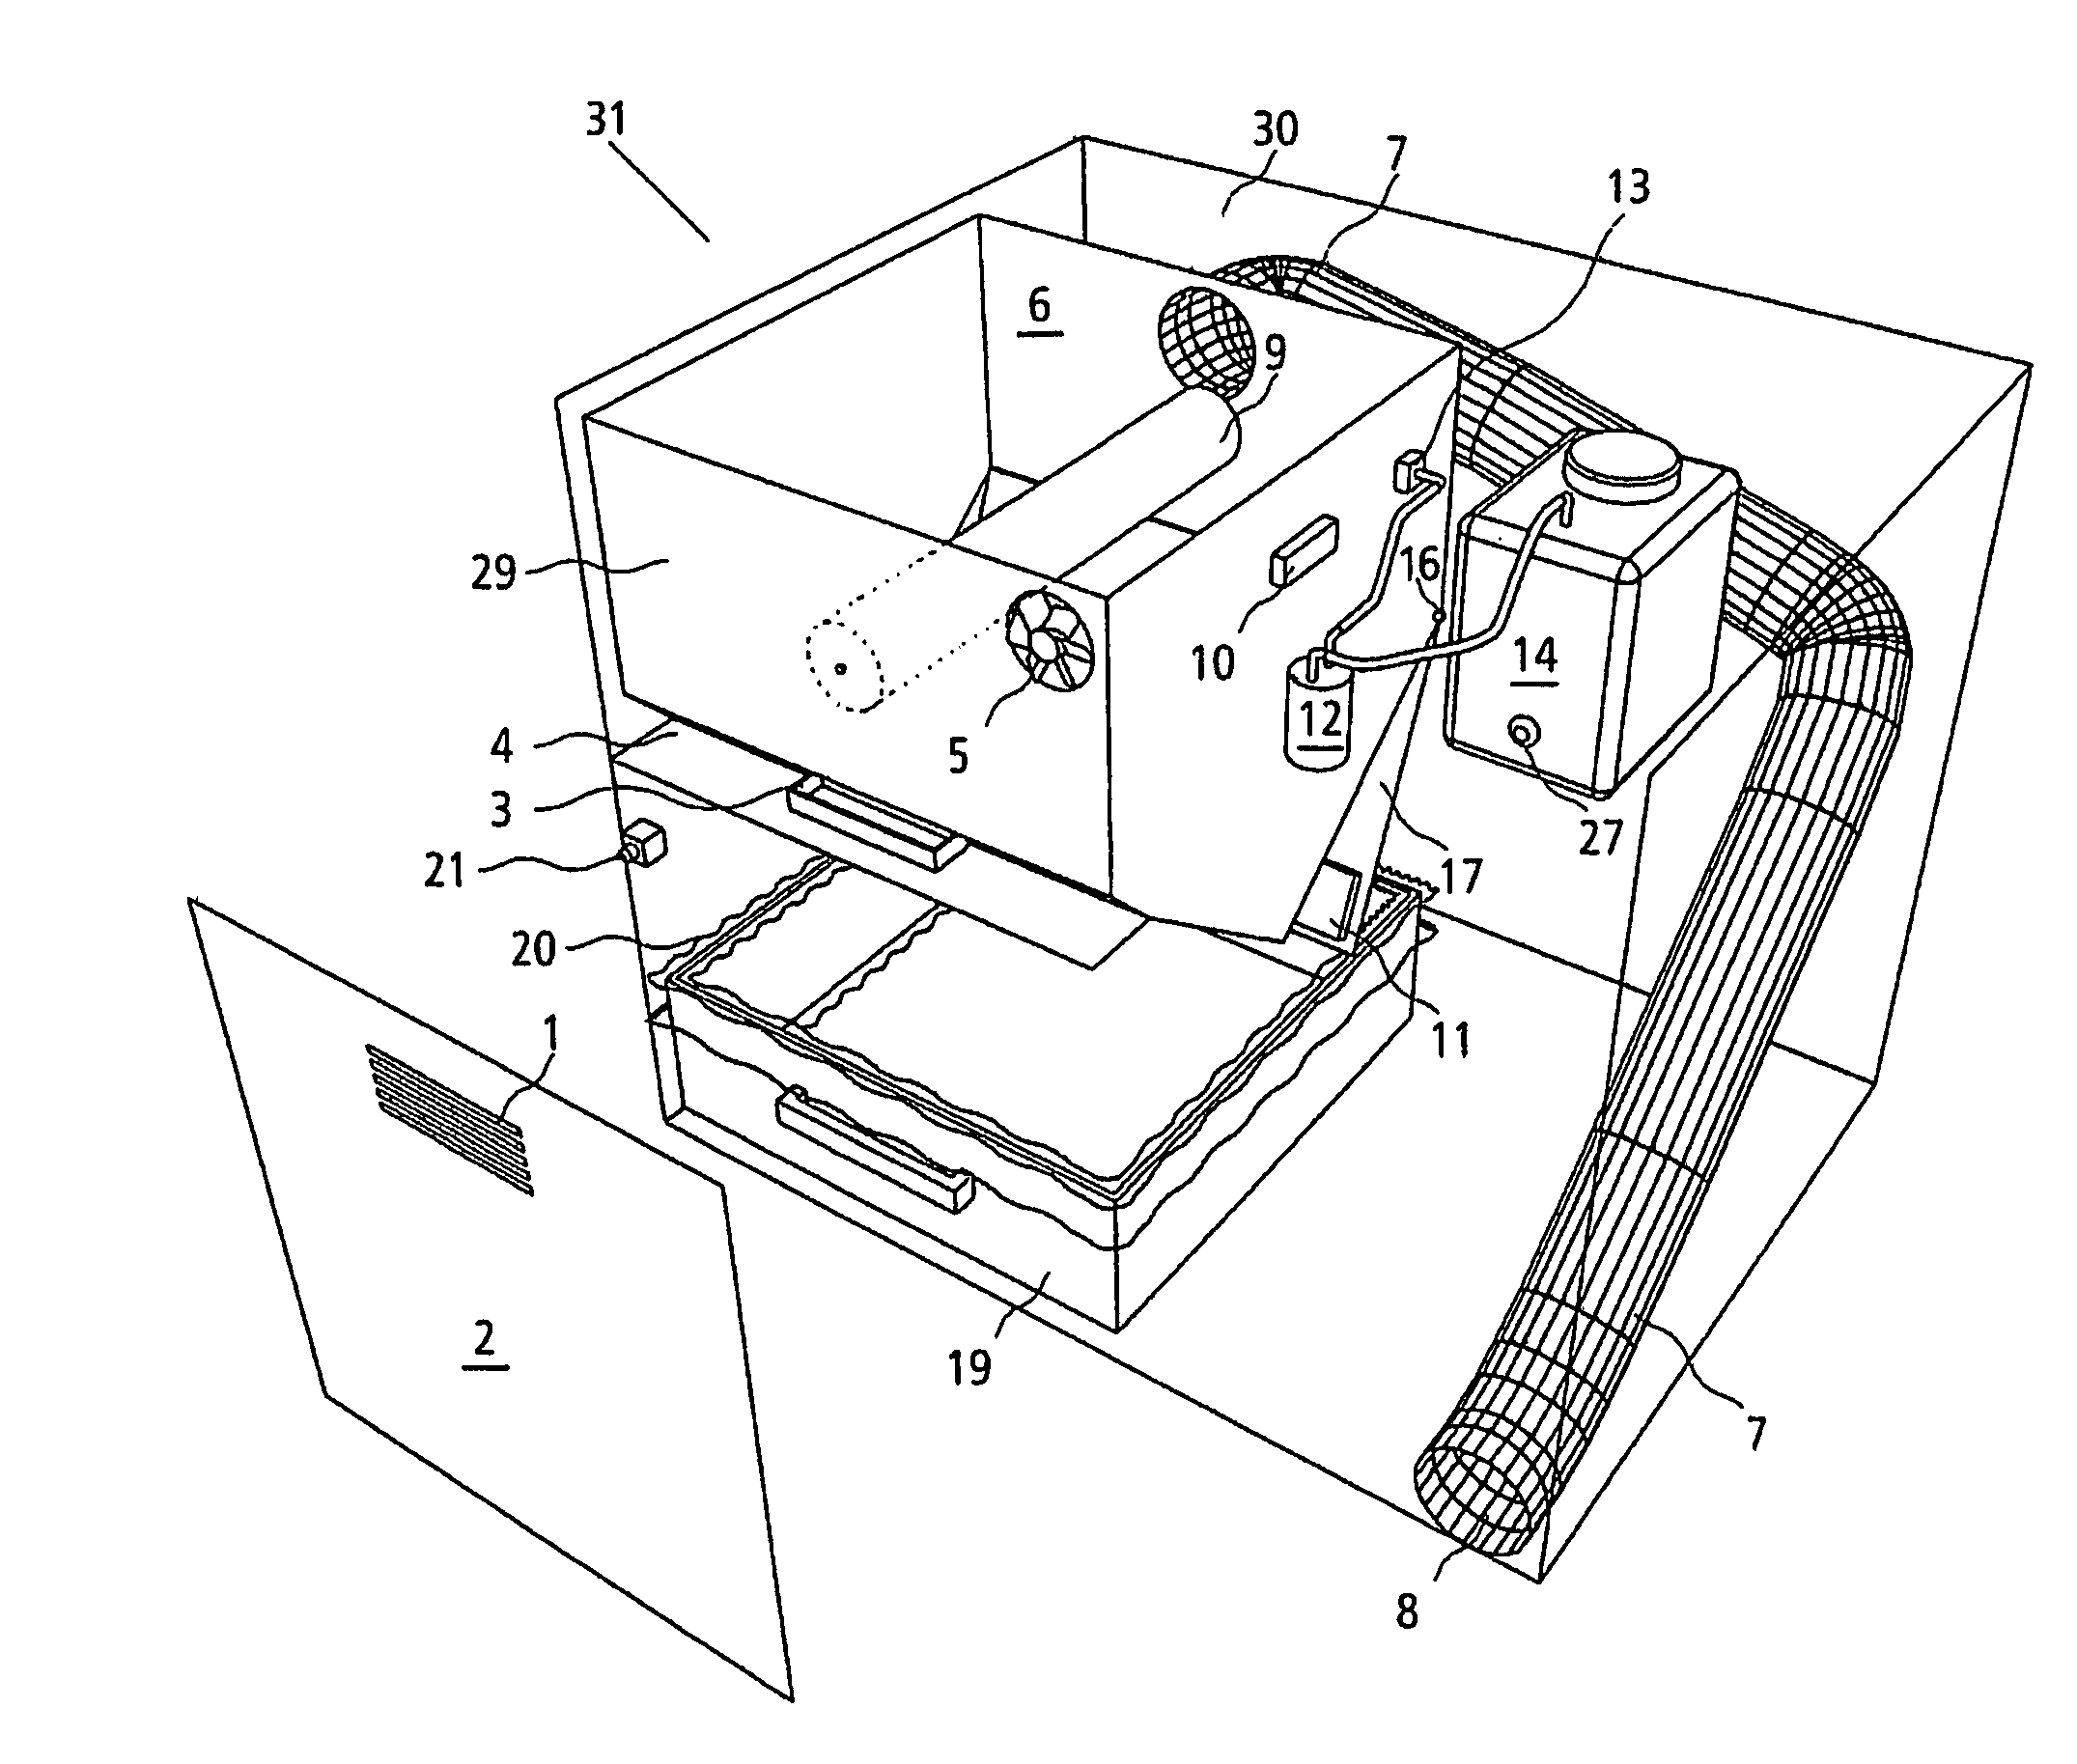 Electronic multiple-use vermin trap and method